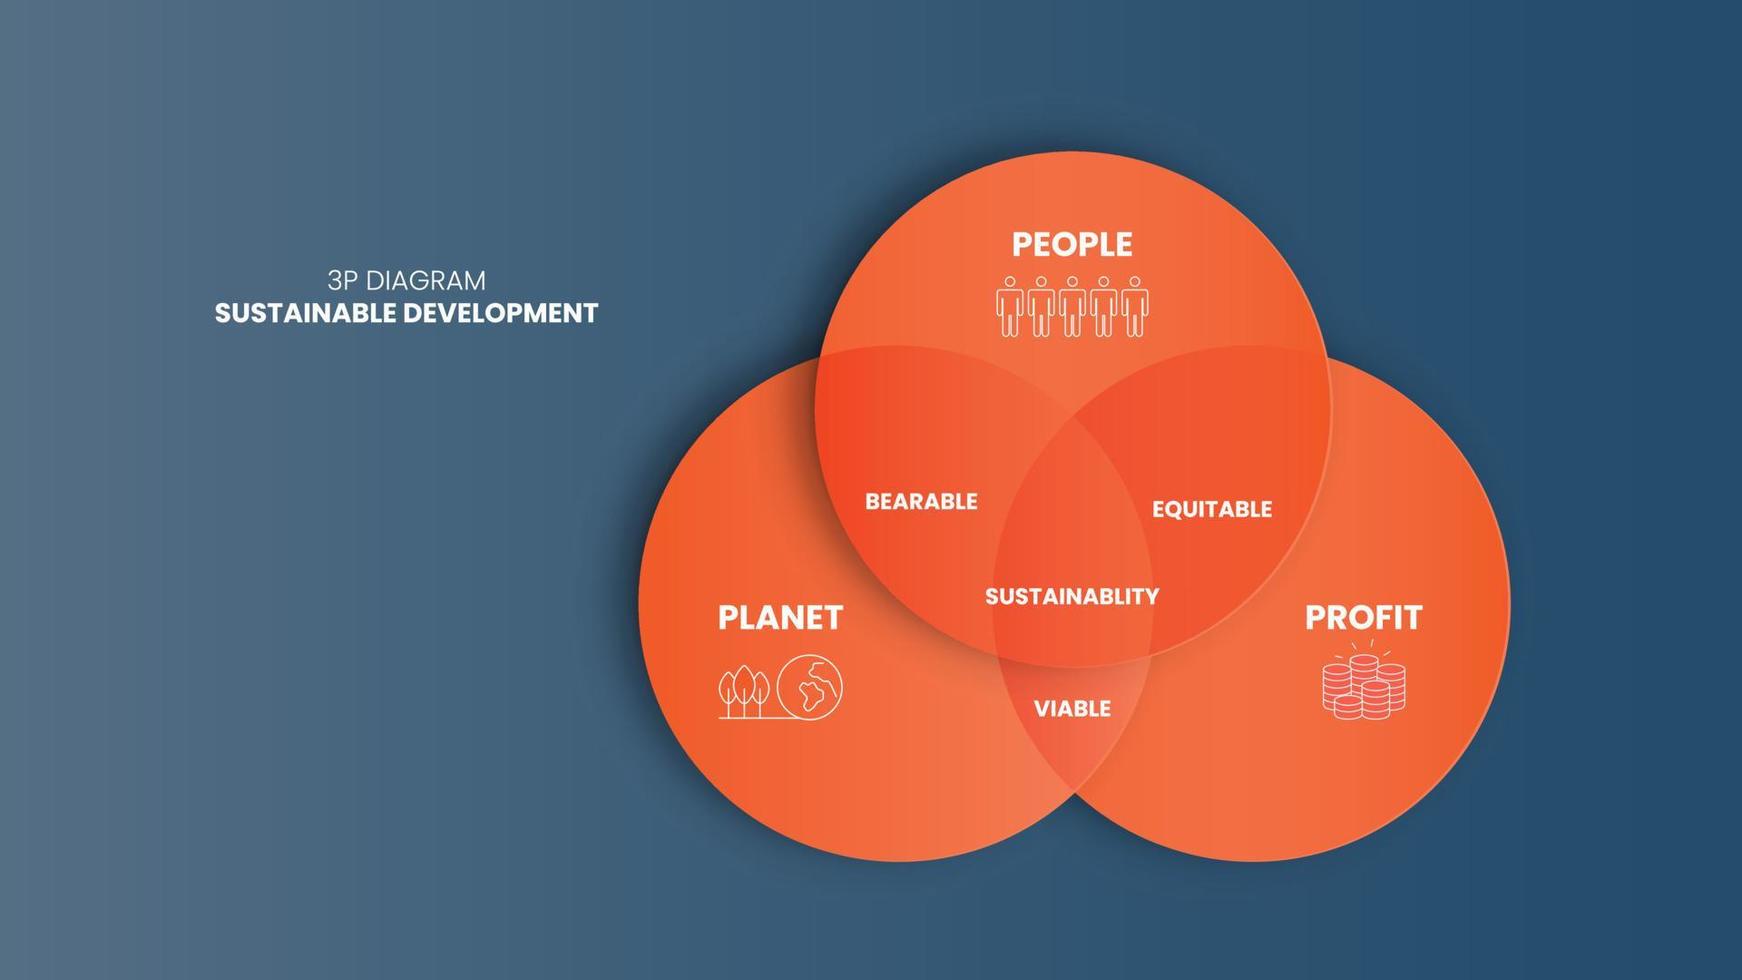 The 3P sustainability diagram has 3 elements people, planet, and profit. The intersection of them has bearable, viable, and equitable dimensions for the sustainable development goals or SDGs vector